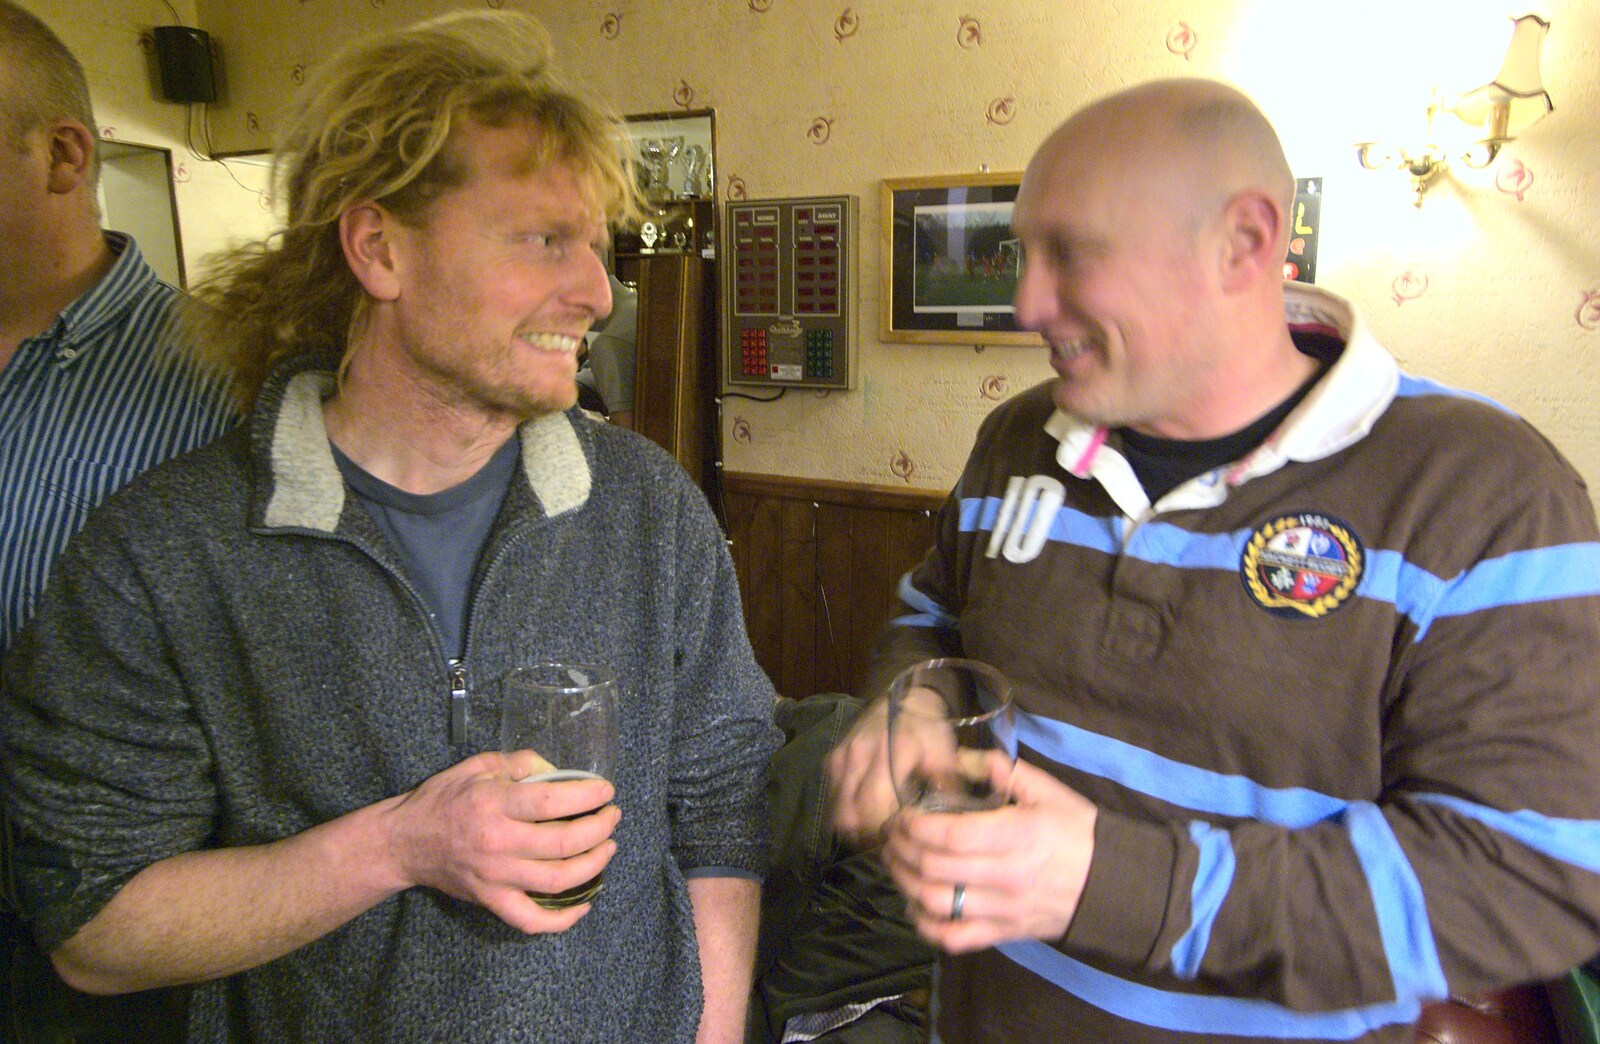 Wavy and Gov from The Cherry Tree Beer Festival, Yaxley, Suffolk - 4th February 2011